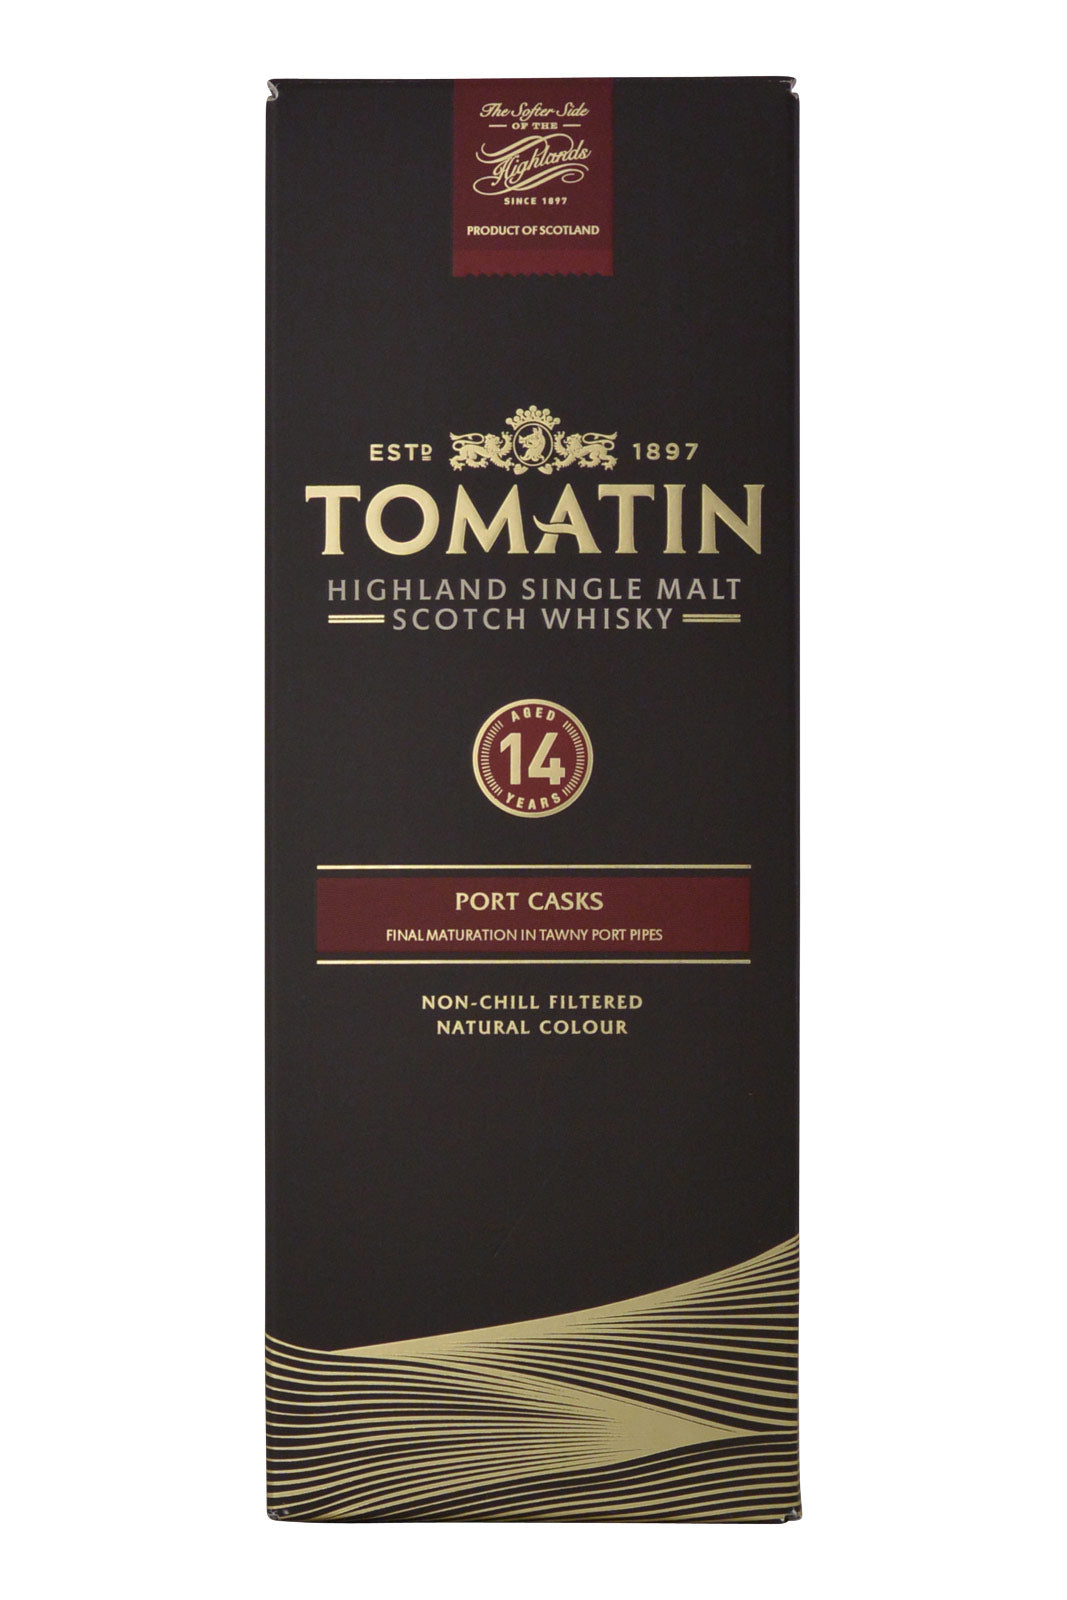 Tomatin 14 Year Old Portwood